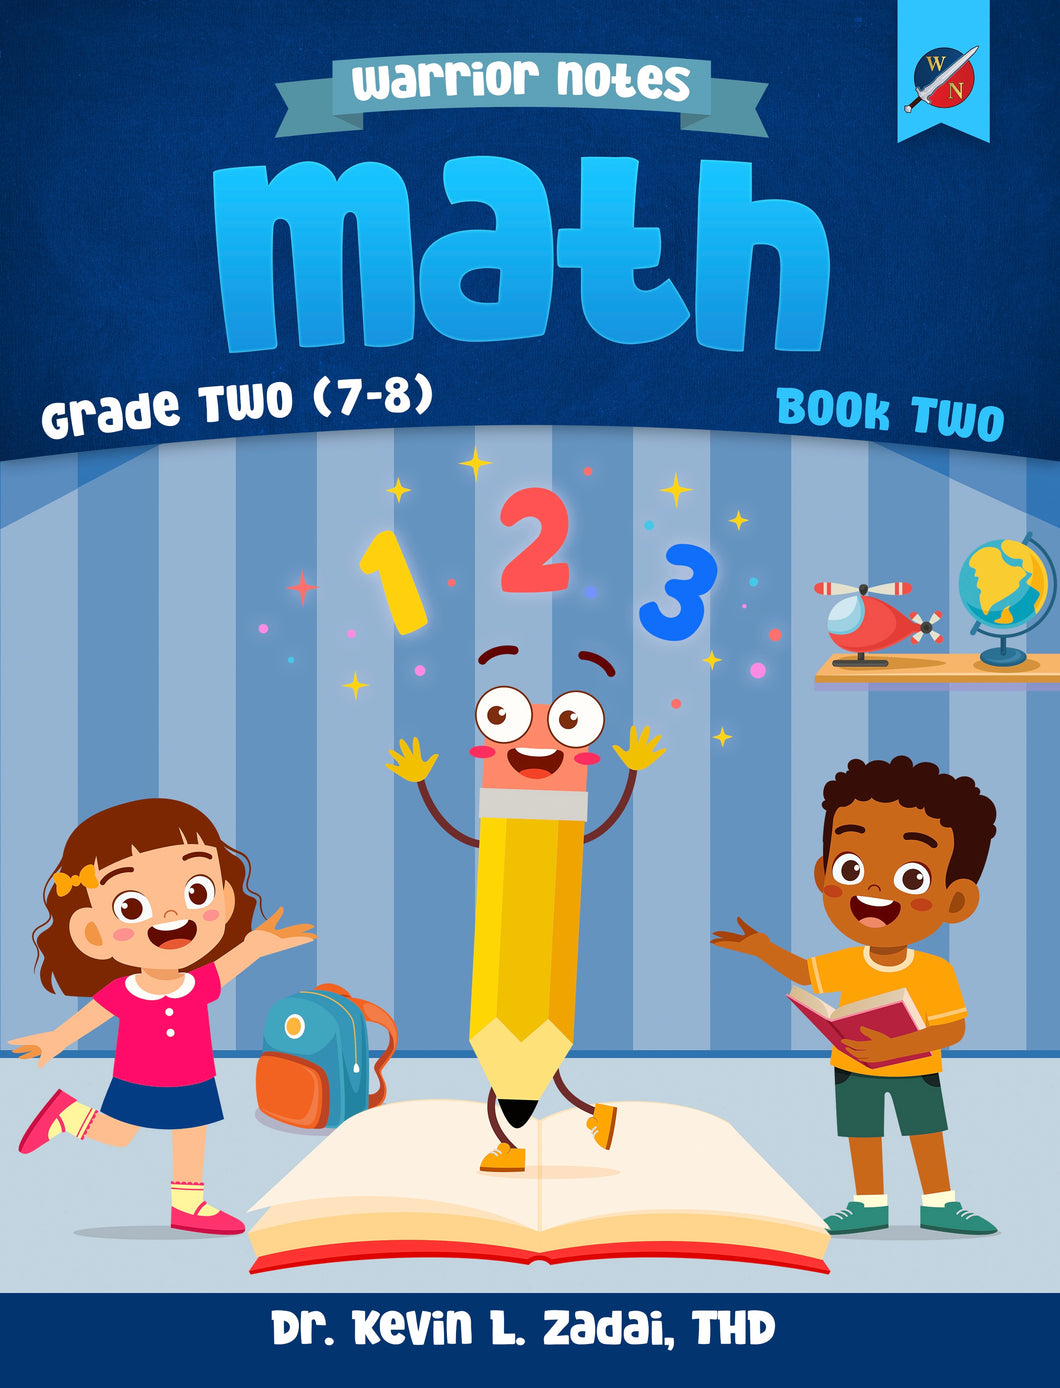 Warrior Notes Homeschooling: Grade Two | Math: Book Two